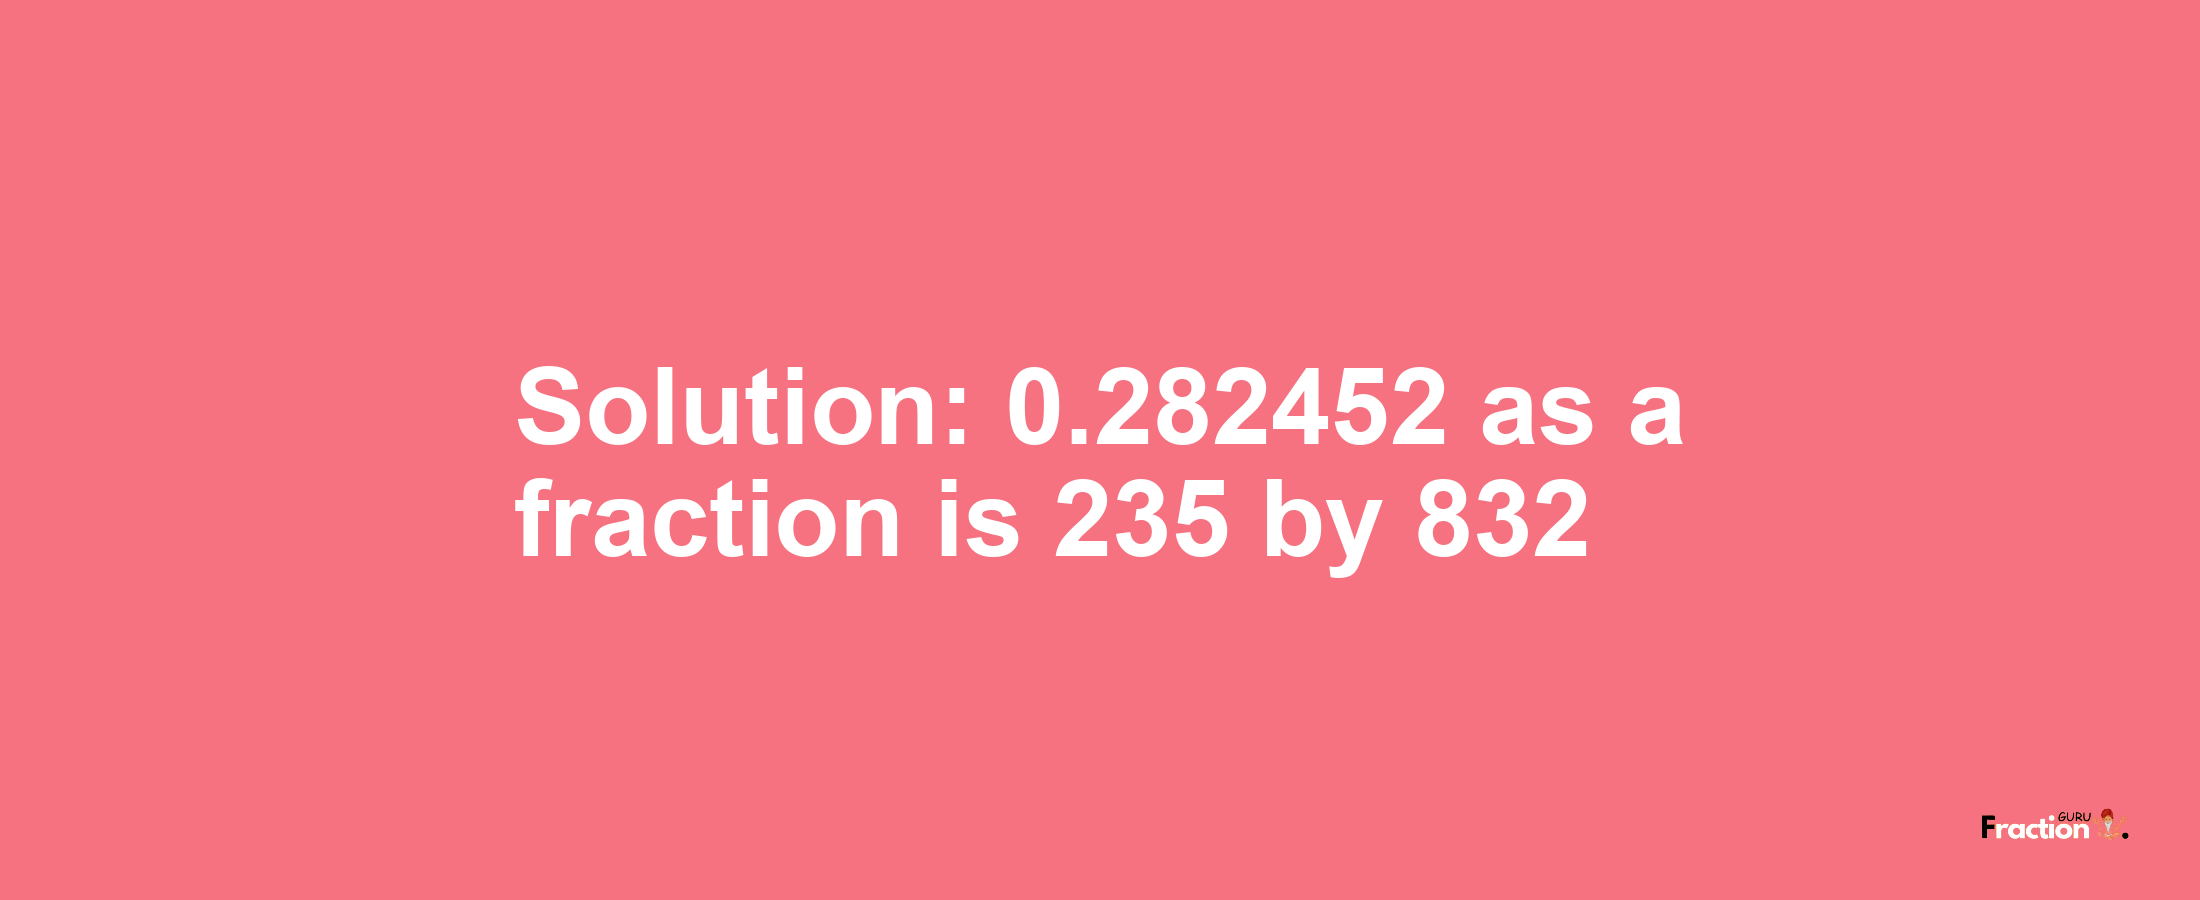 Solution:0.282452 as a fraction is 235/832